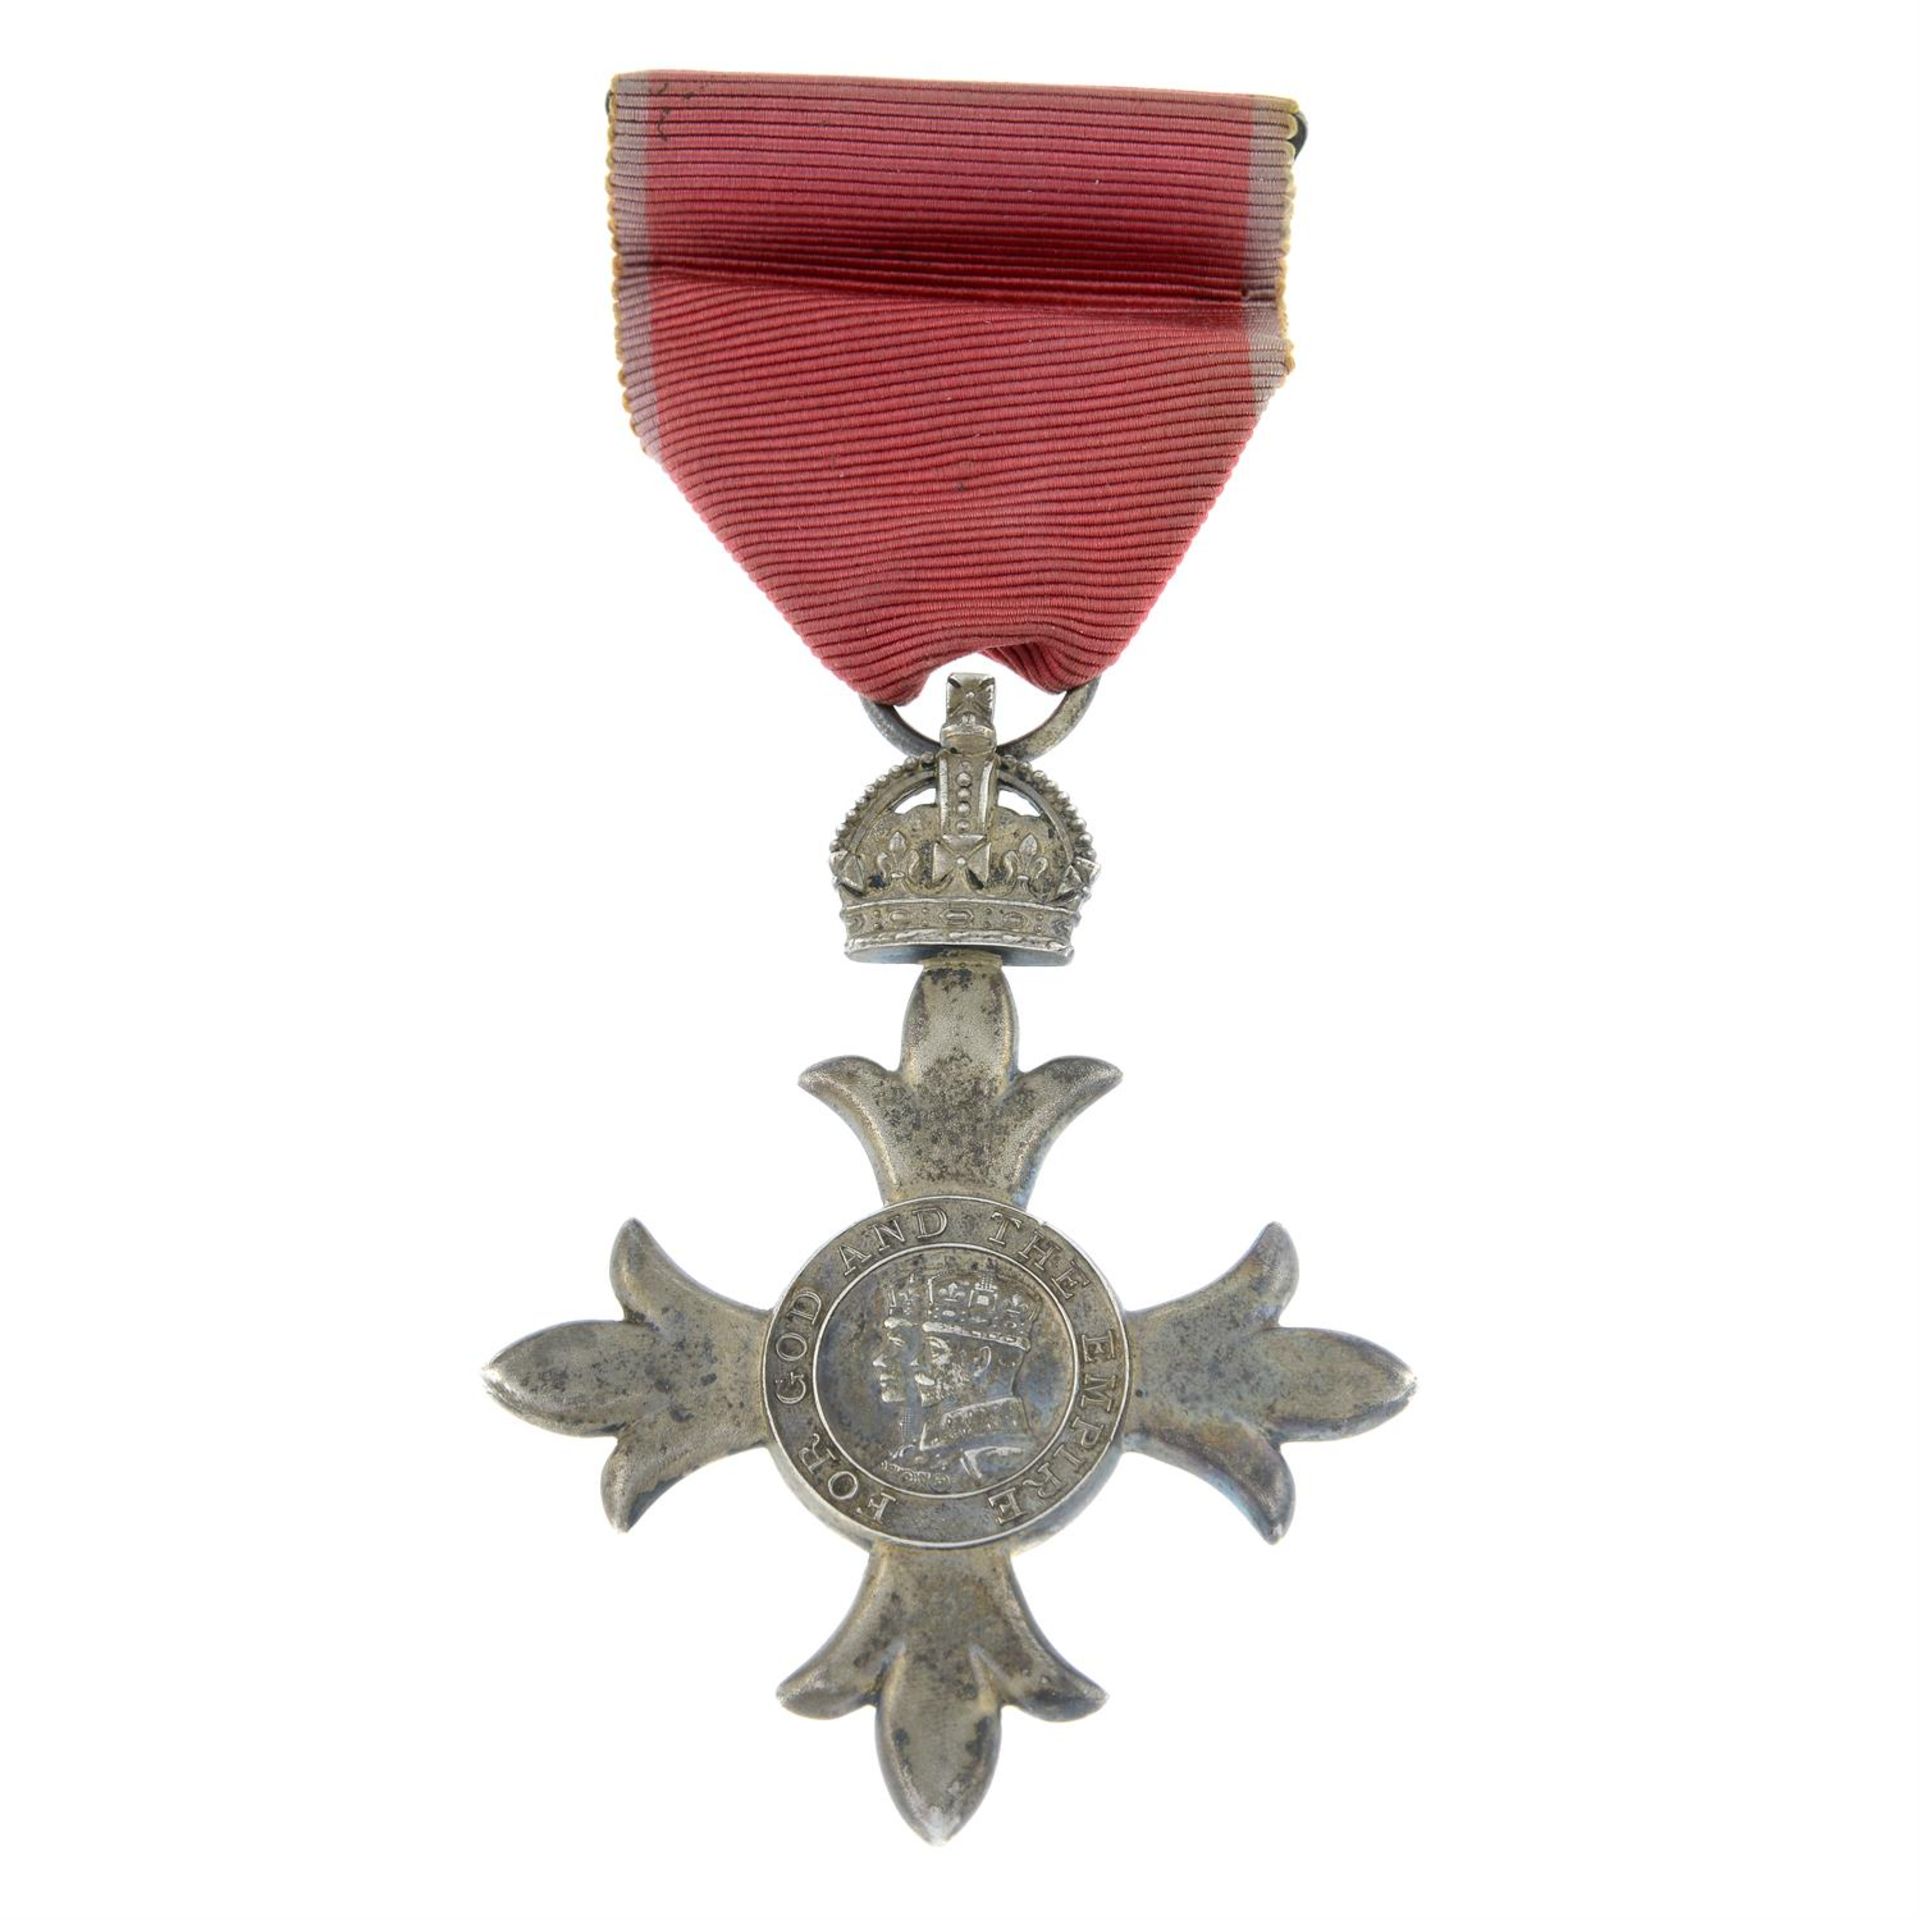 MBE breast badge (Civil Division); together with a Golden Jubilee Medal 2002. (2).